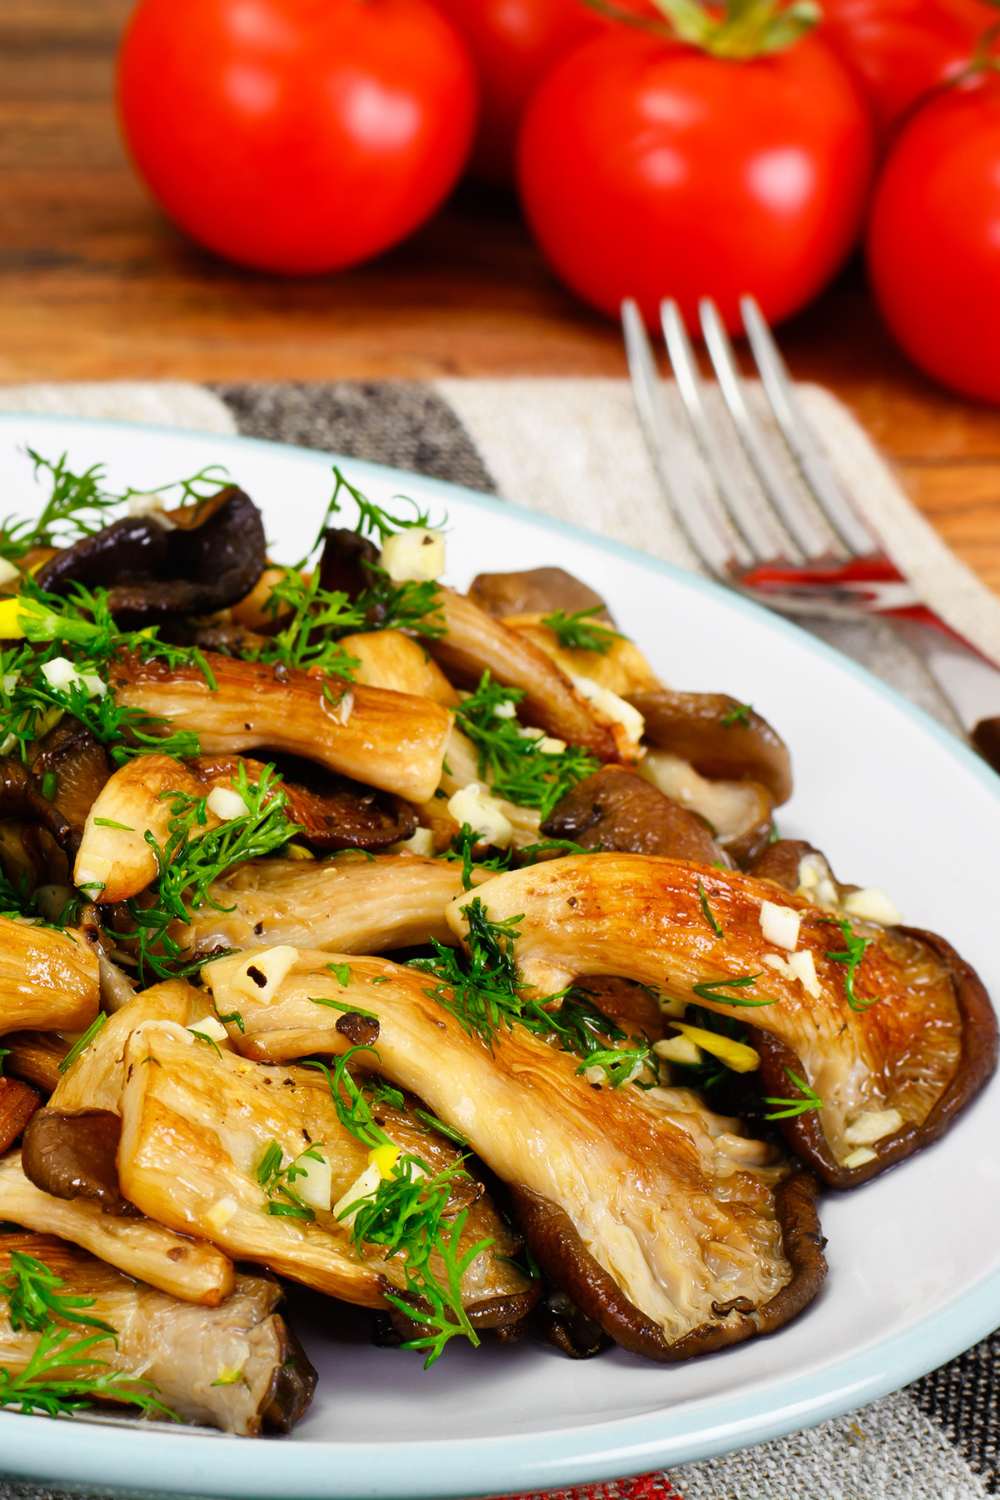 20 Recipes With Blue Oyster Mushrooms